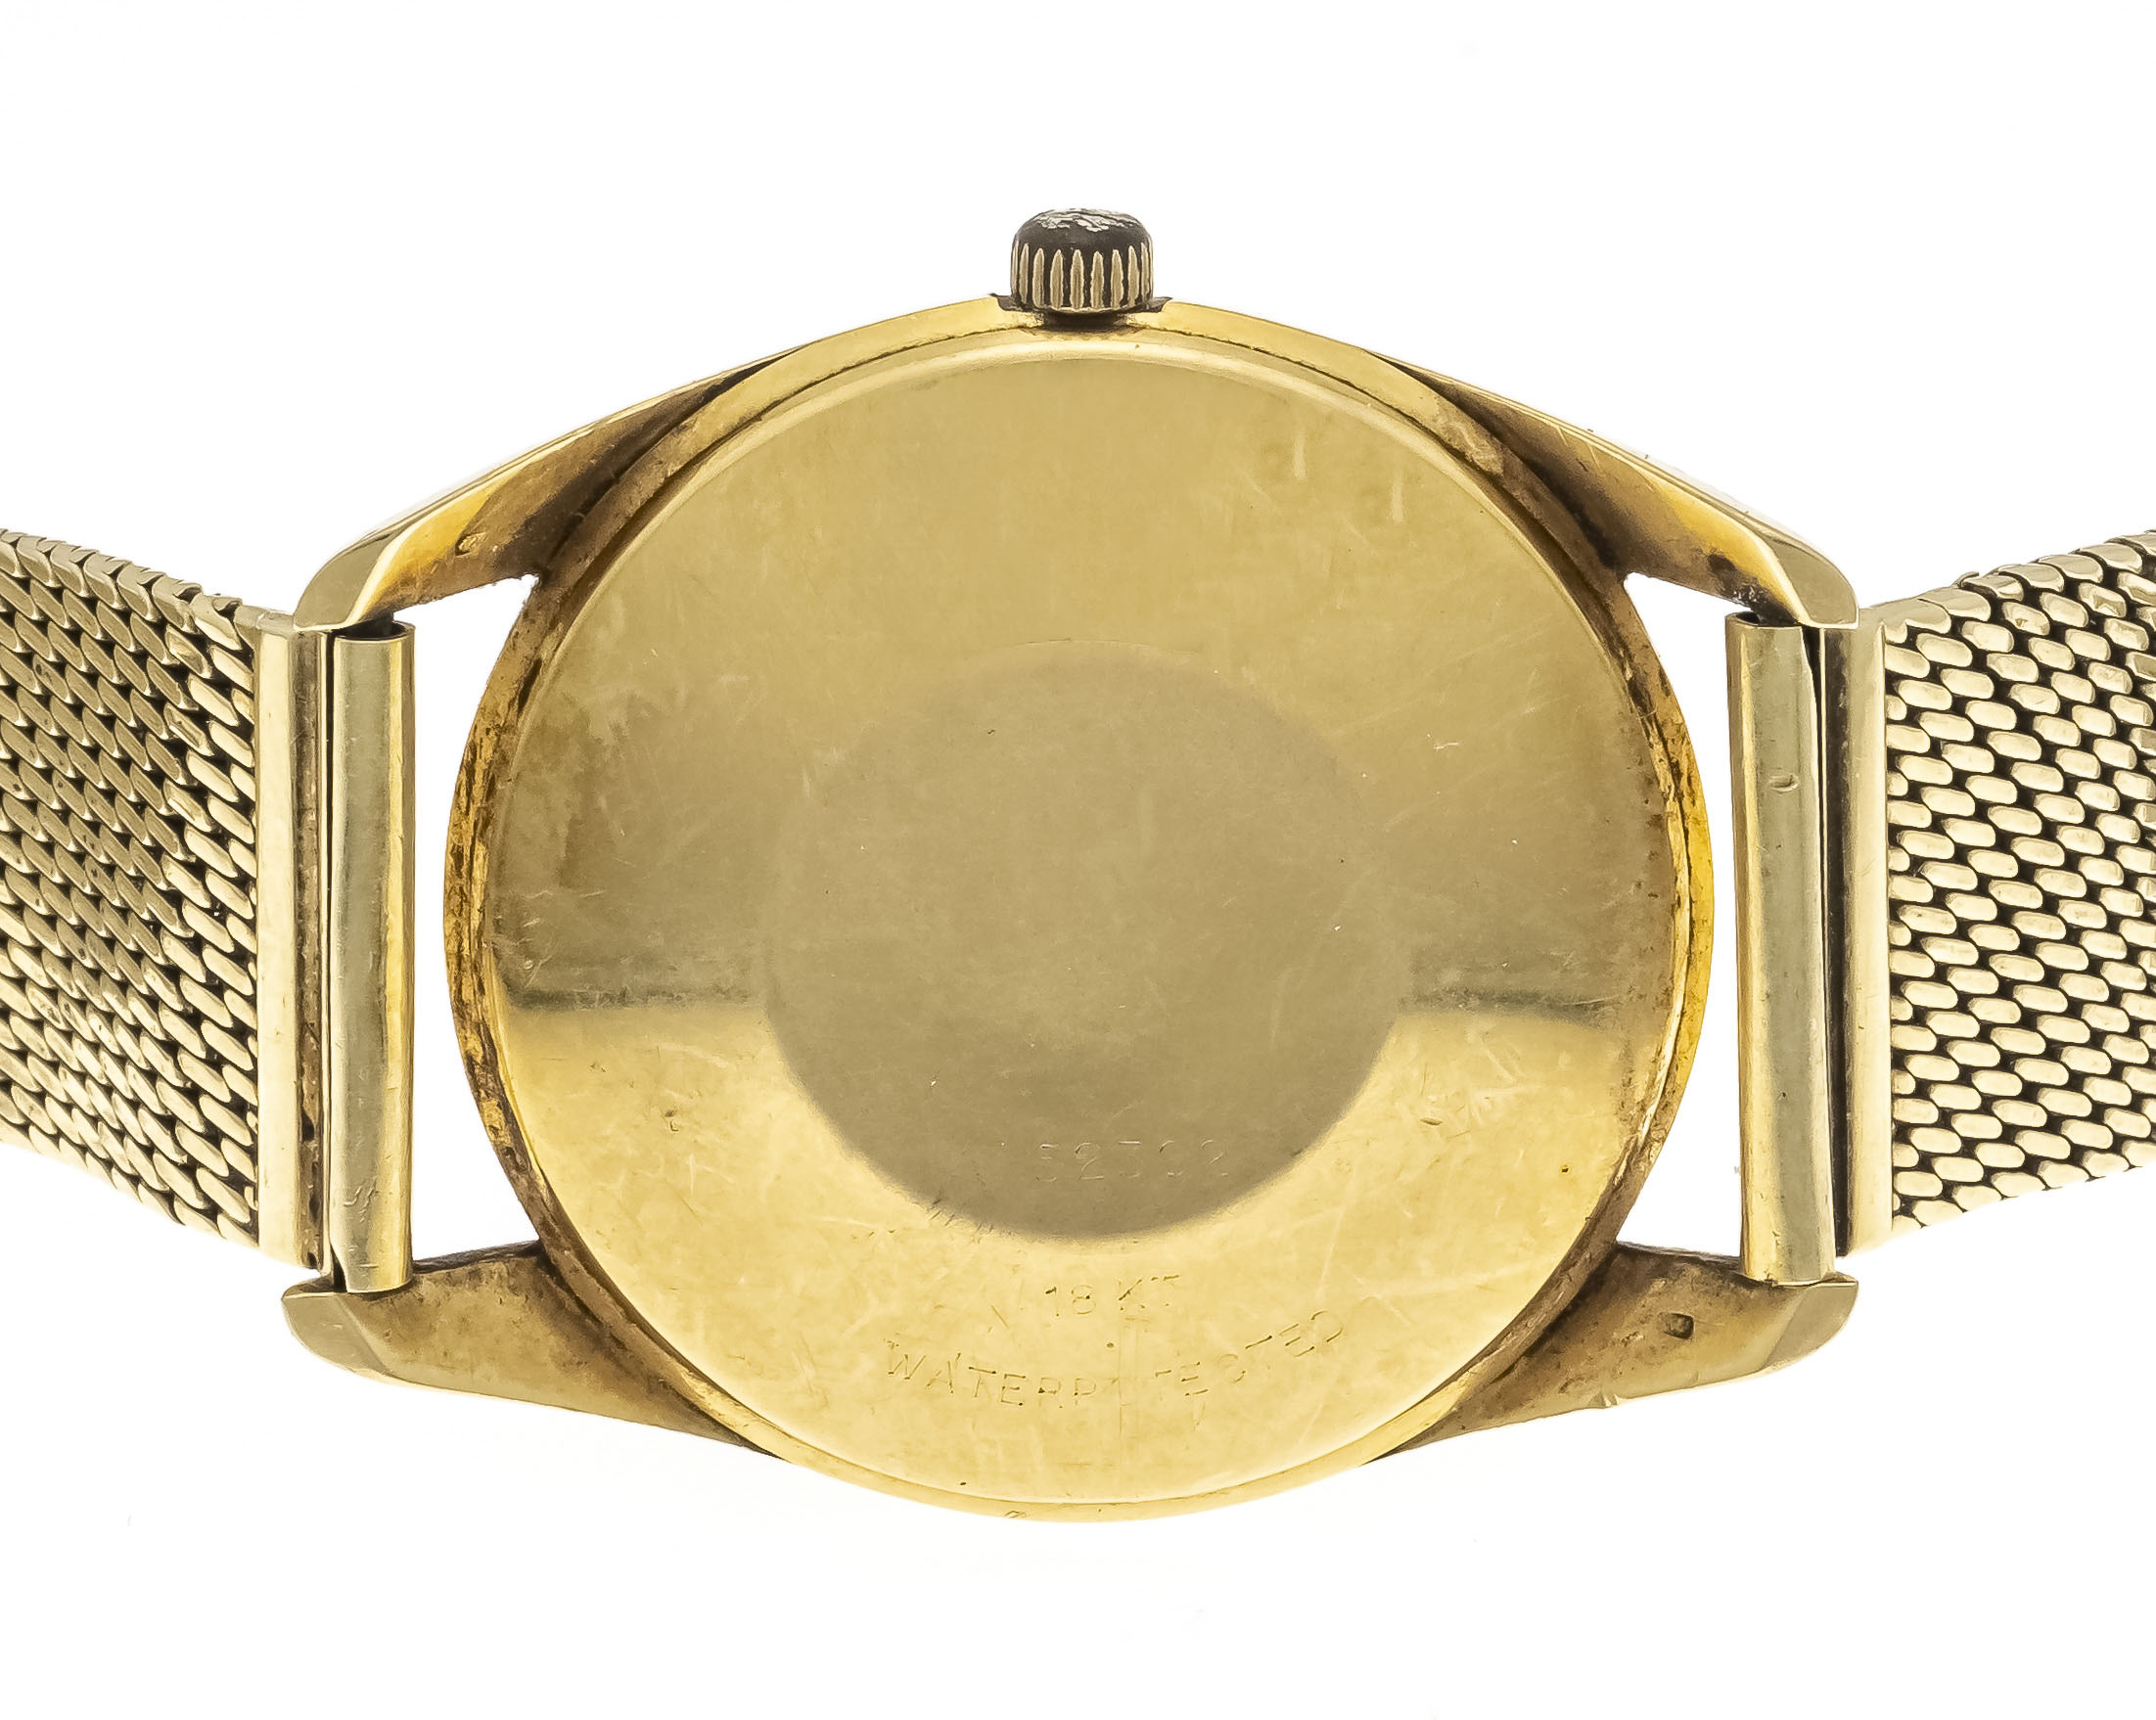 Wilhelm Frölich men's watch 750/000 GG, automatic, Ref. 8482.0664, silver-colored dial with - Image 2 of 2